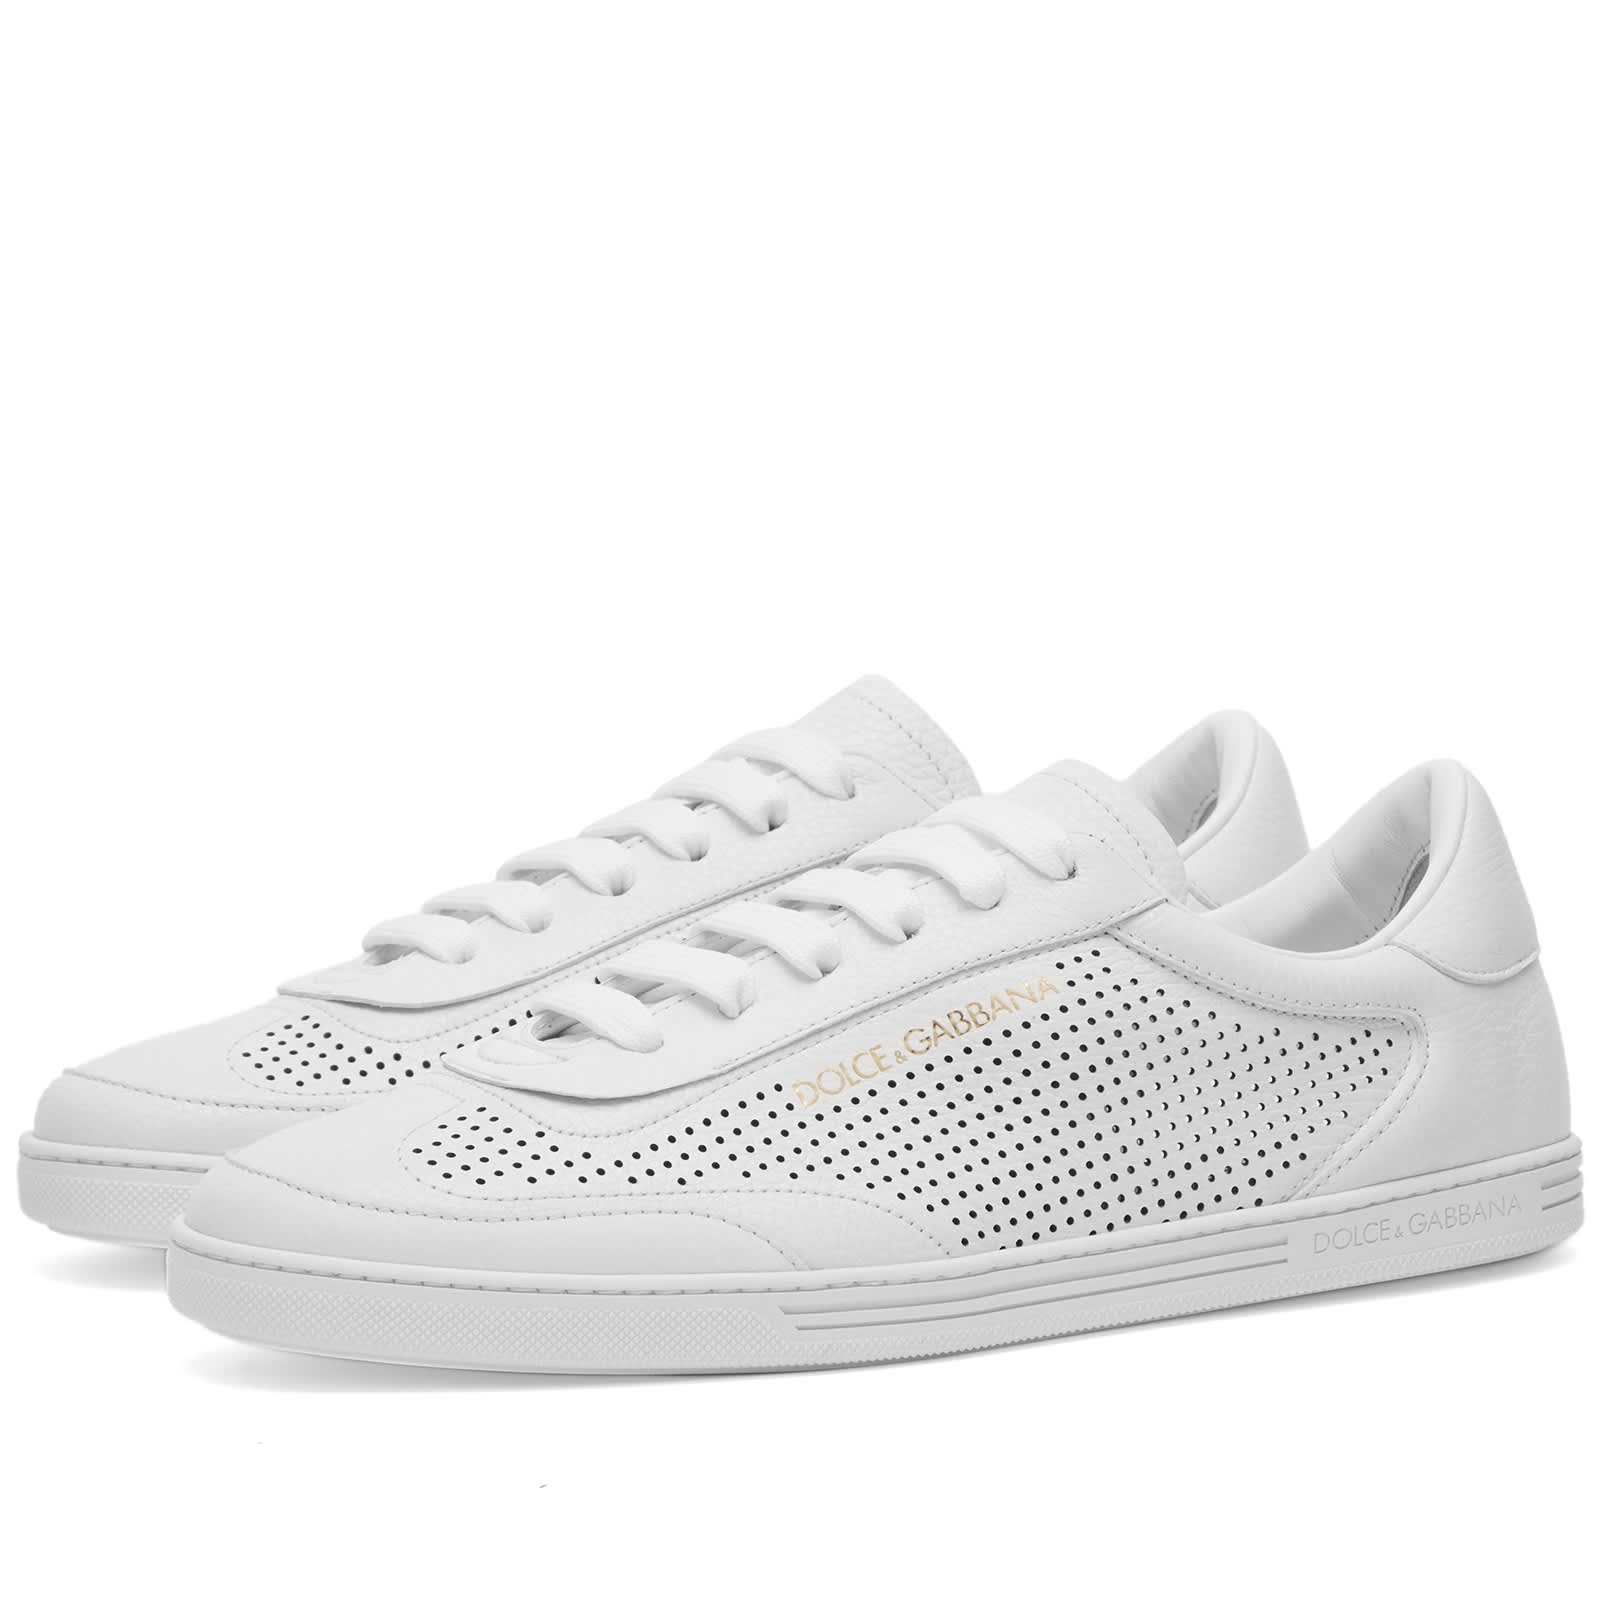 Dolce & Gabbana Saint Tropez Perforated Leather Sneaker - 1